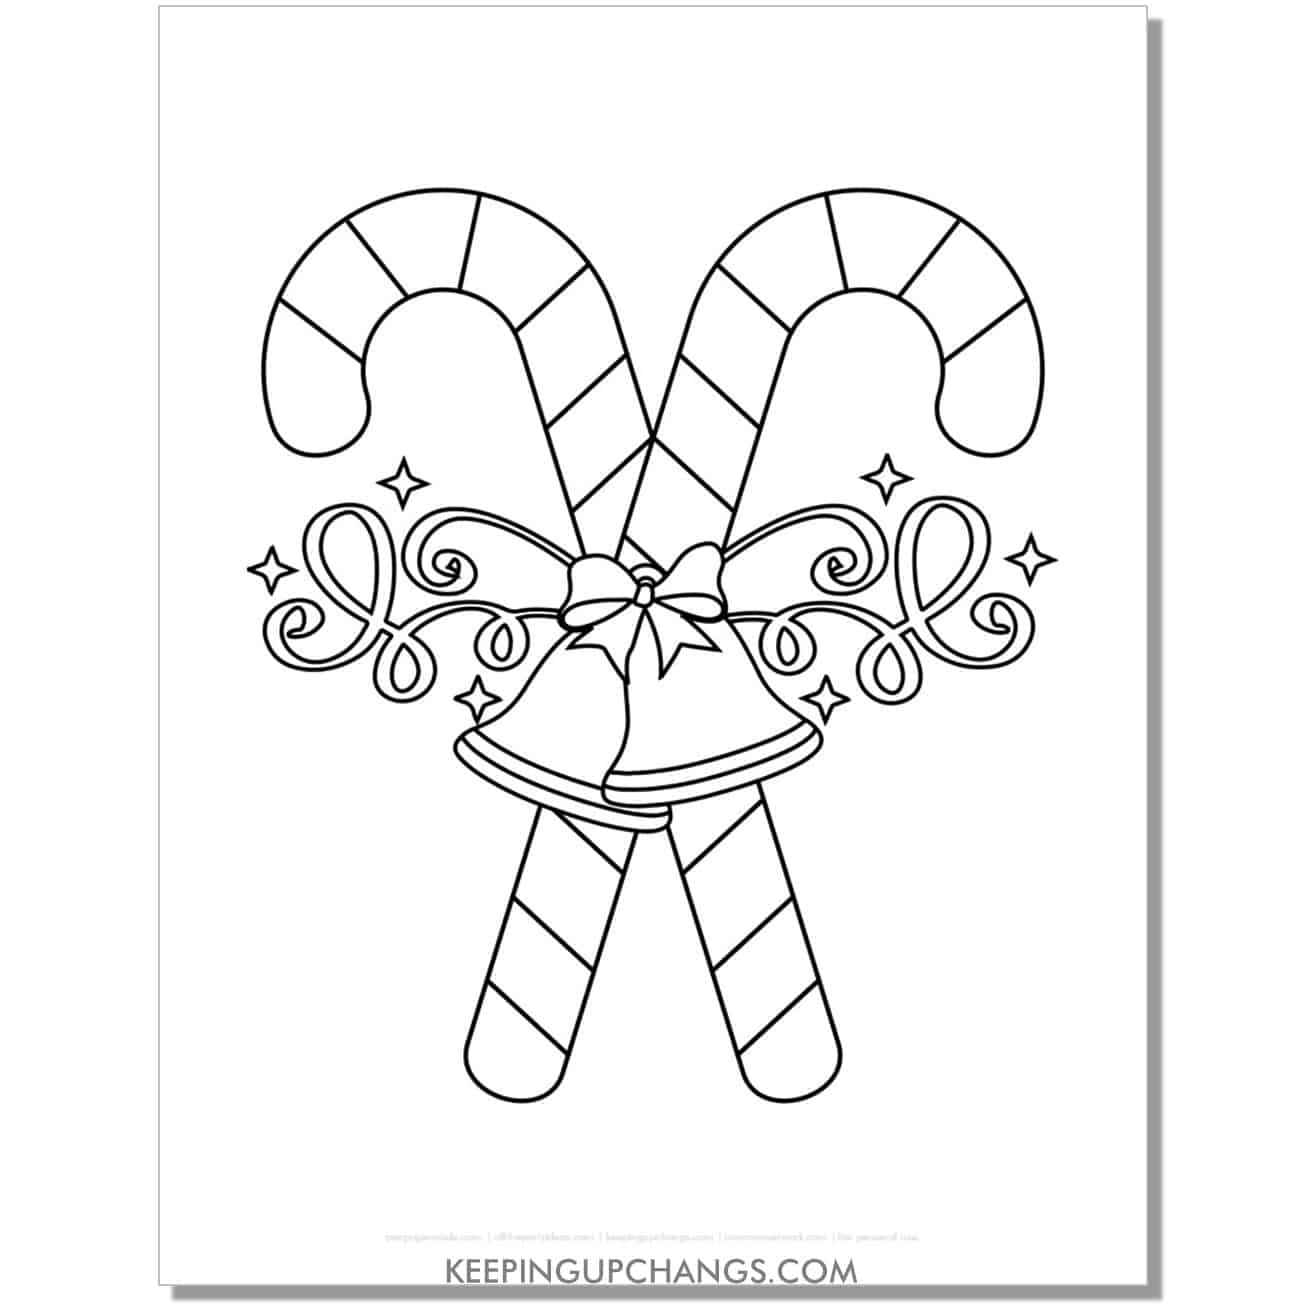 free big candy cane cross with jingle bells coloring page.